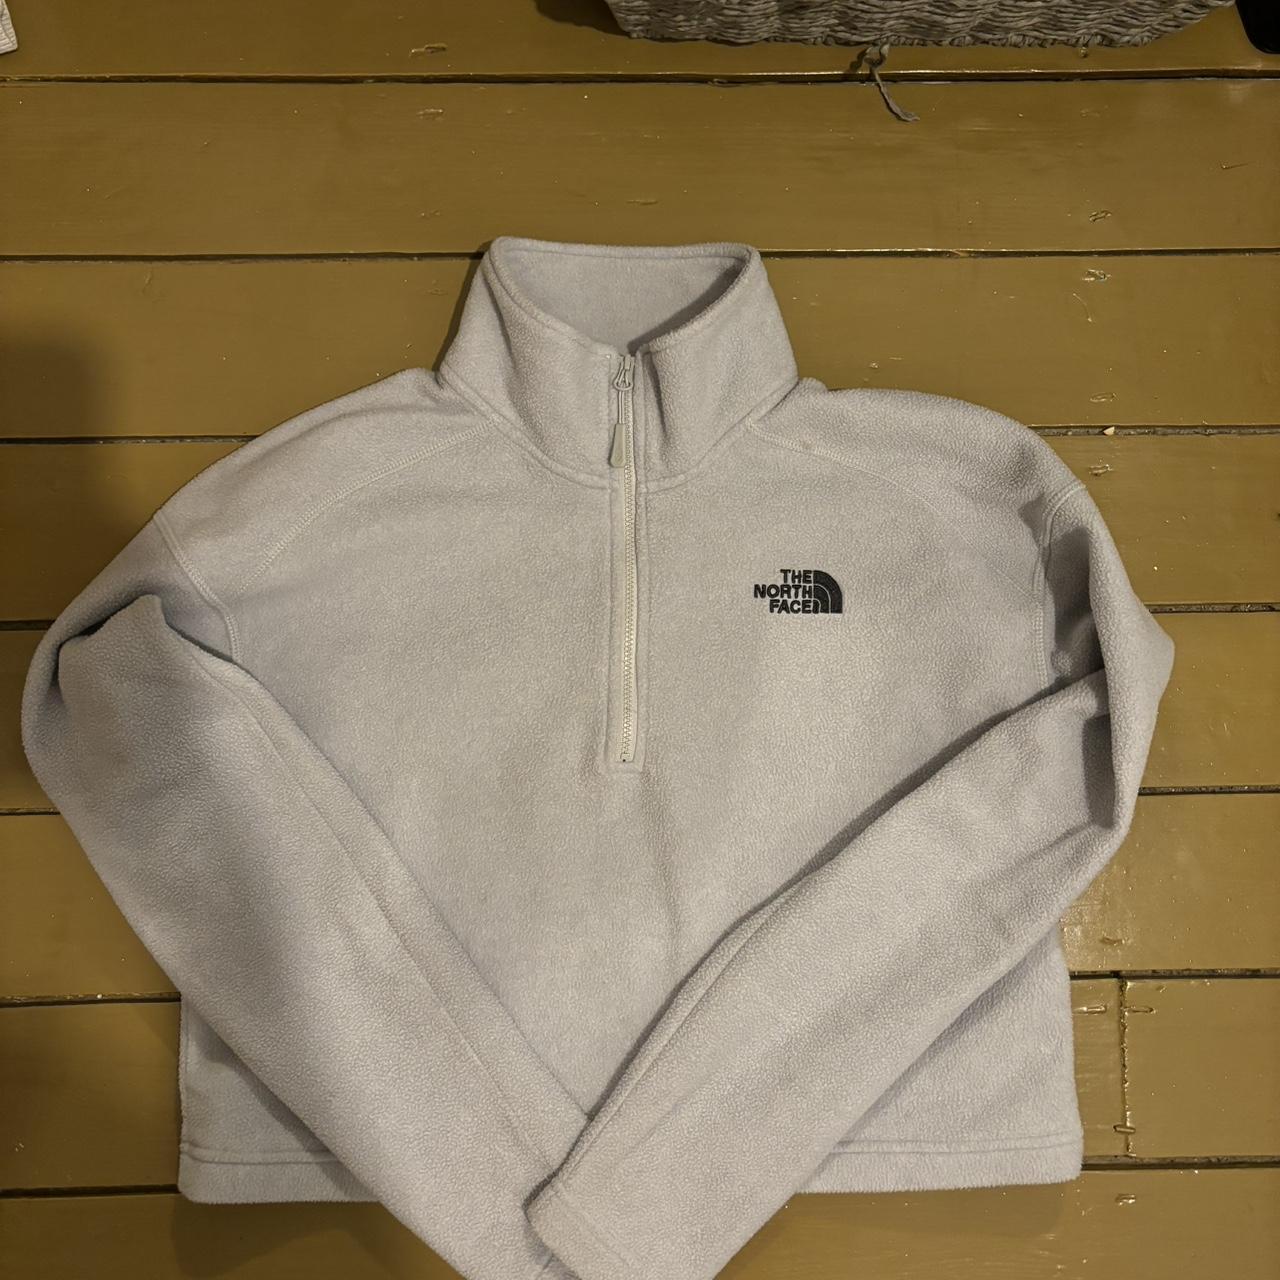 North face cropped fleece Size S Never worn just... - Depop